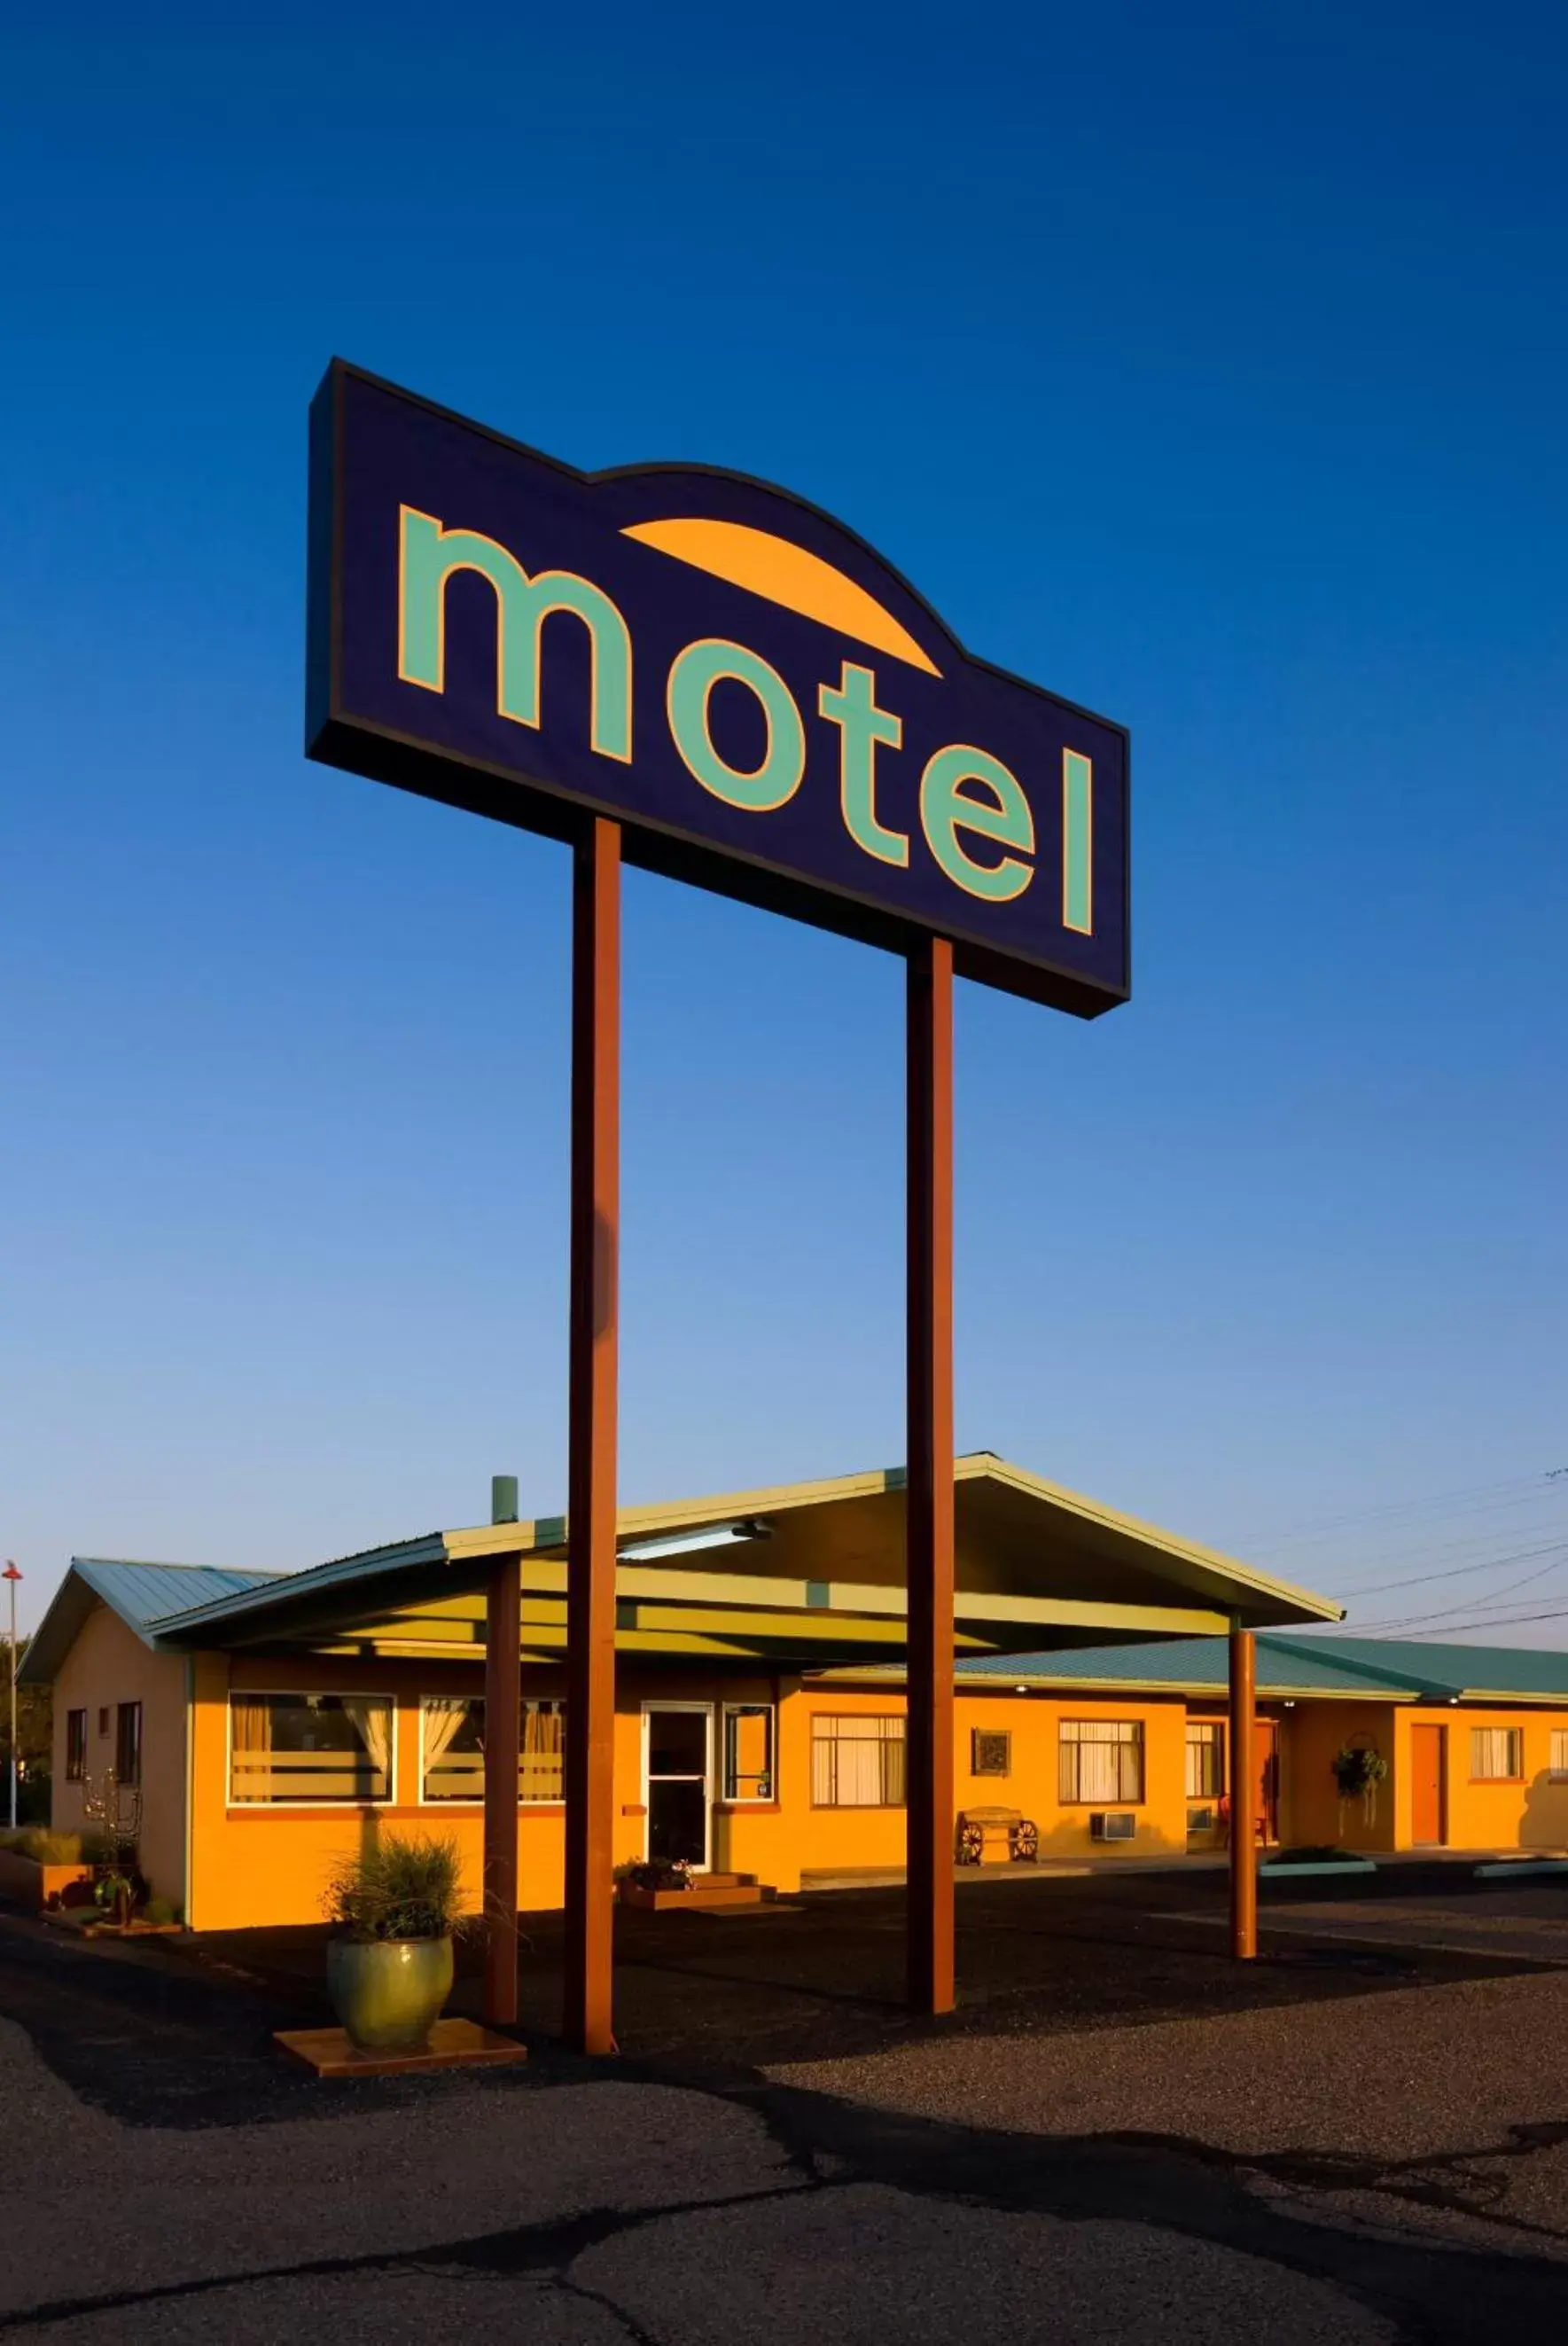 Property Building in Sunset Motel Moriarty